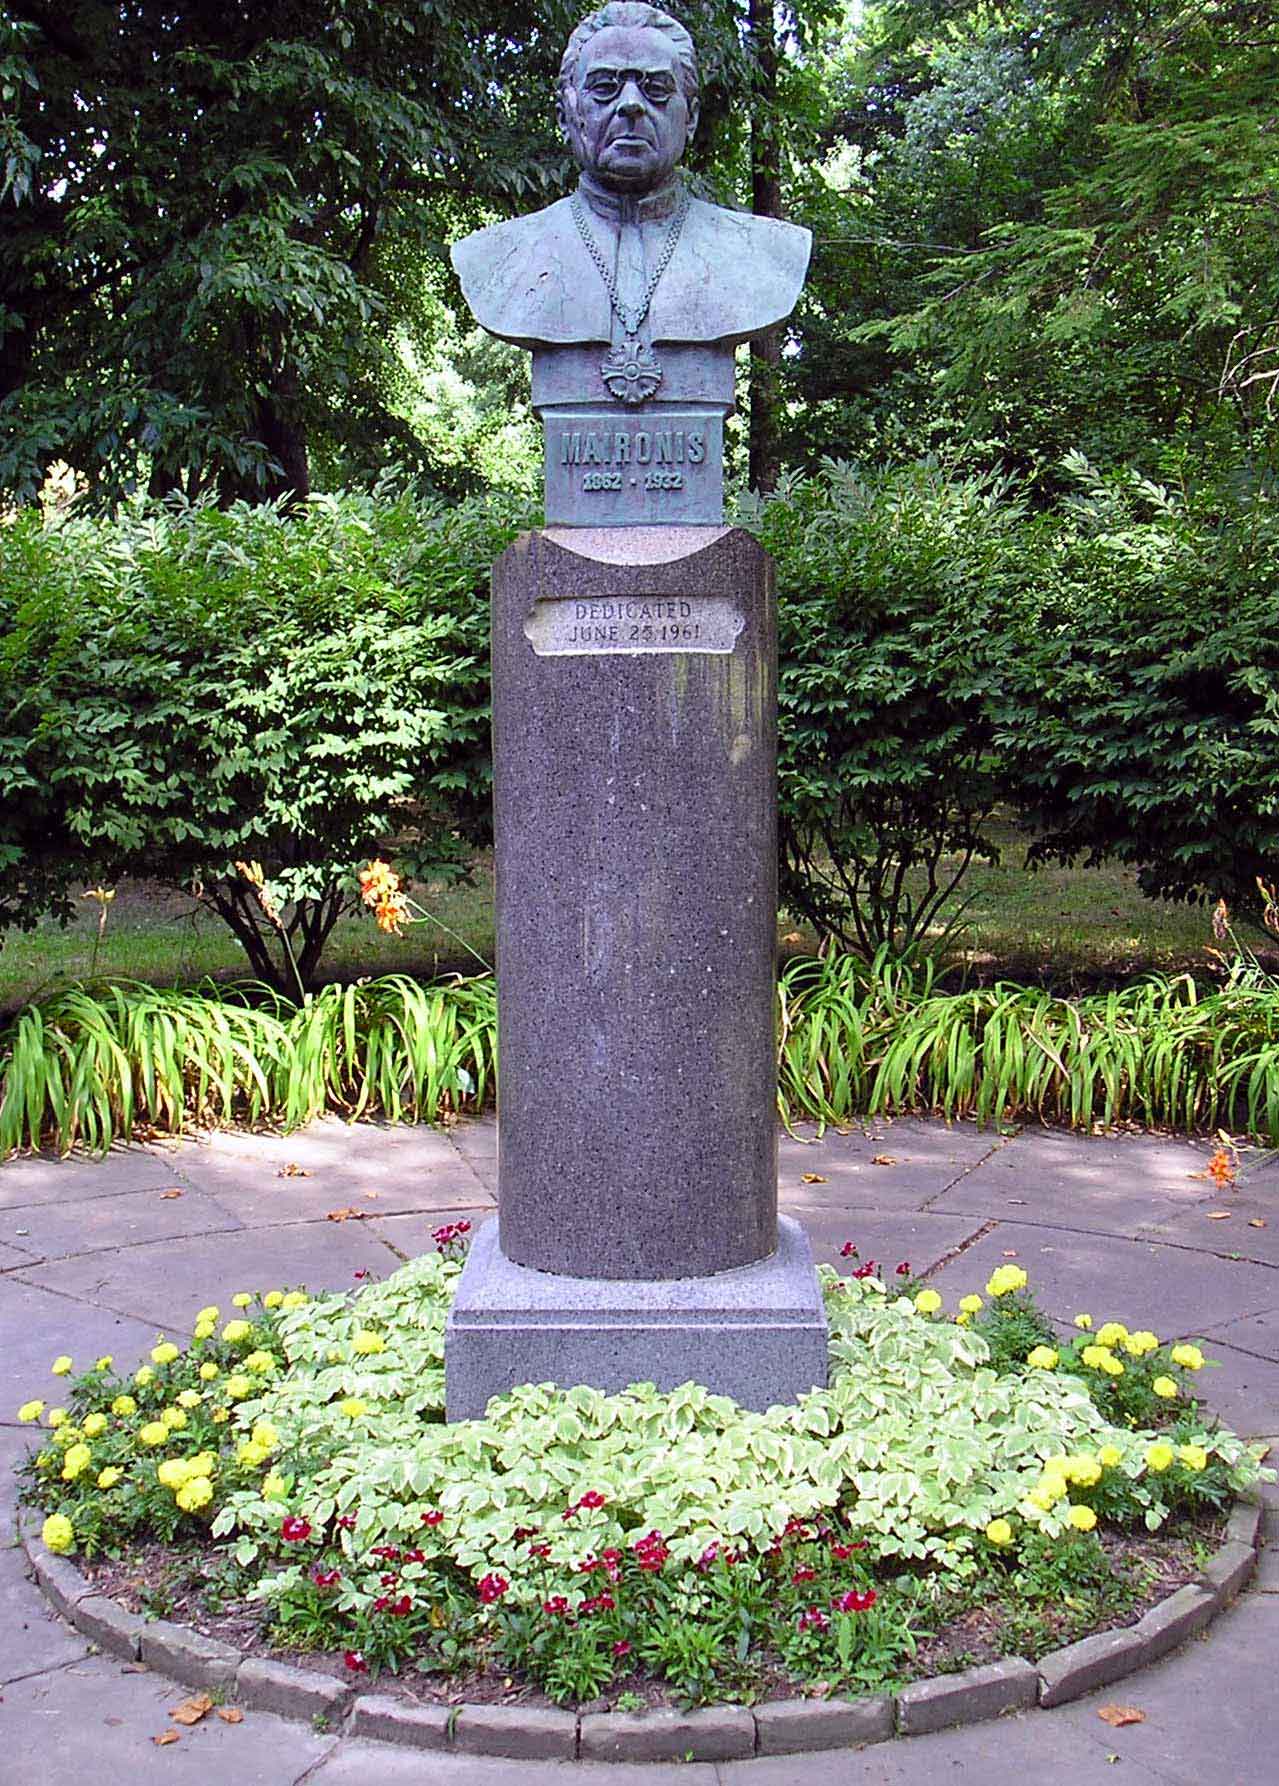 Statue of Lithuanian Poet Maciulis Maironis in the Lithuanian Cultural Garden